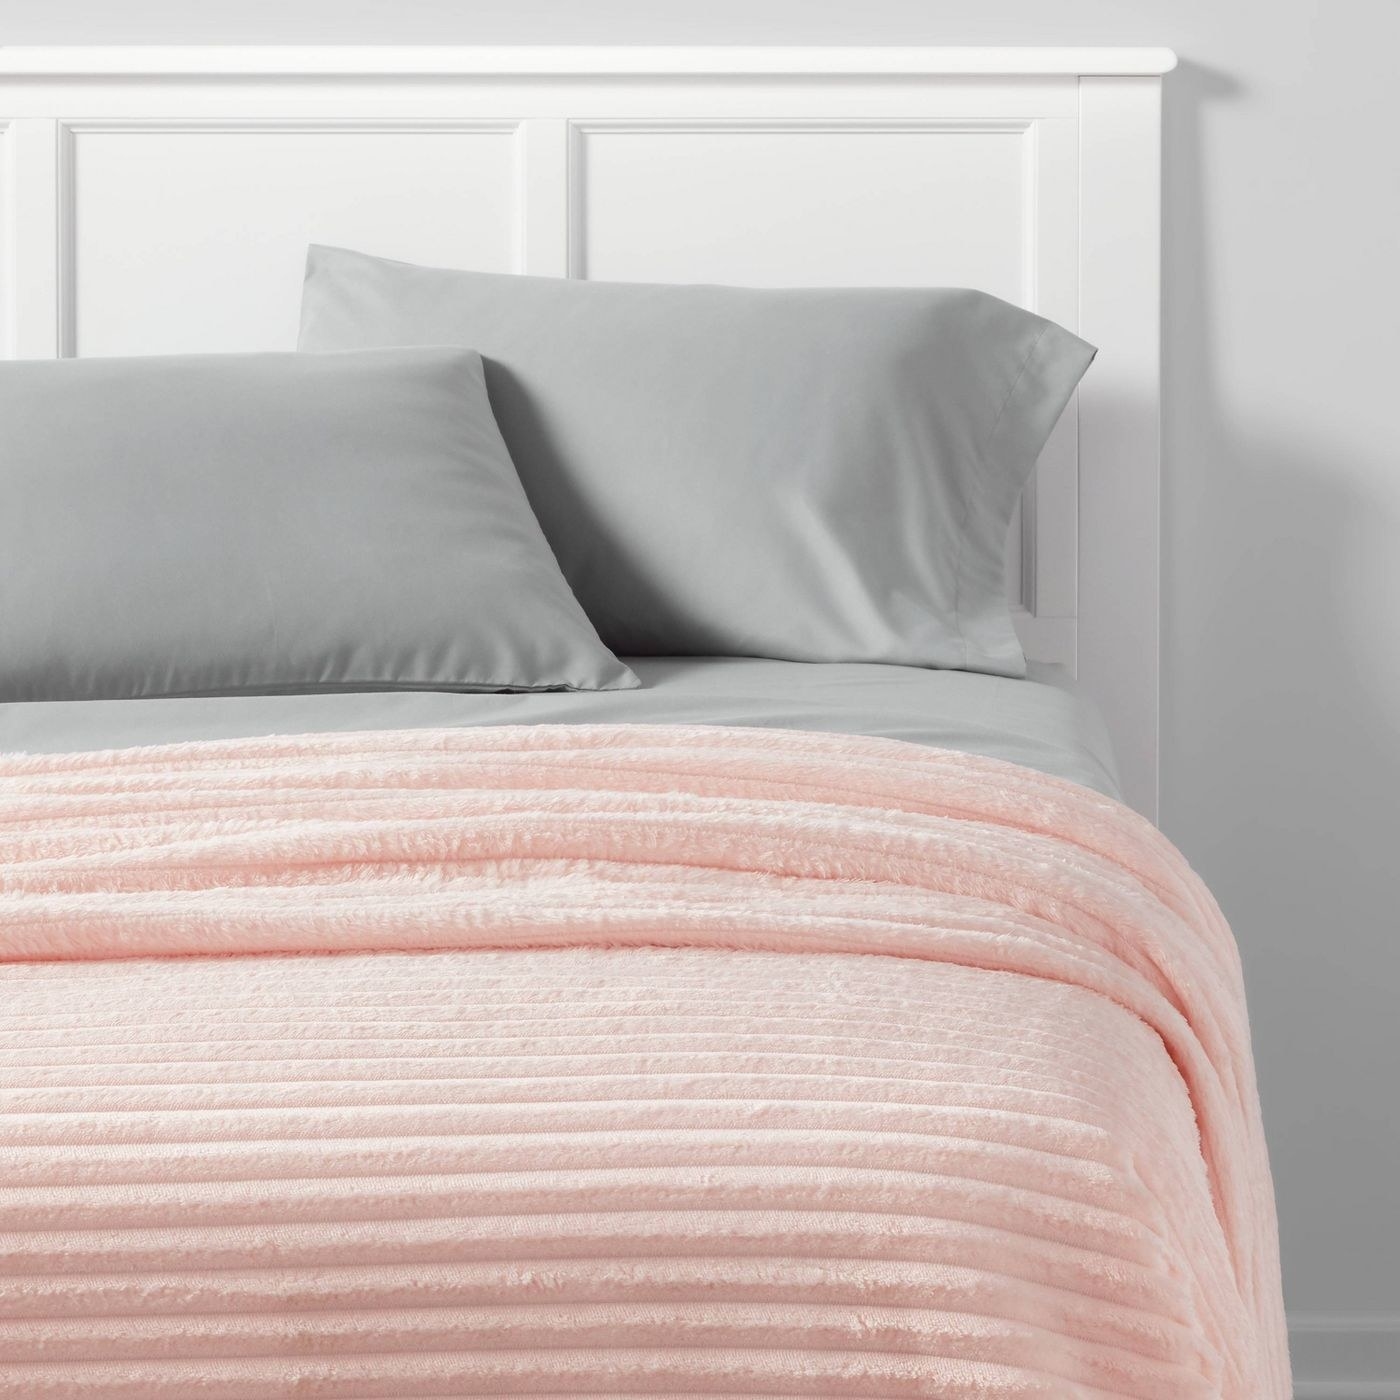 pink ribbed blanket on a bed